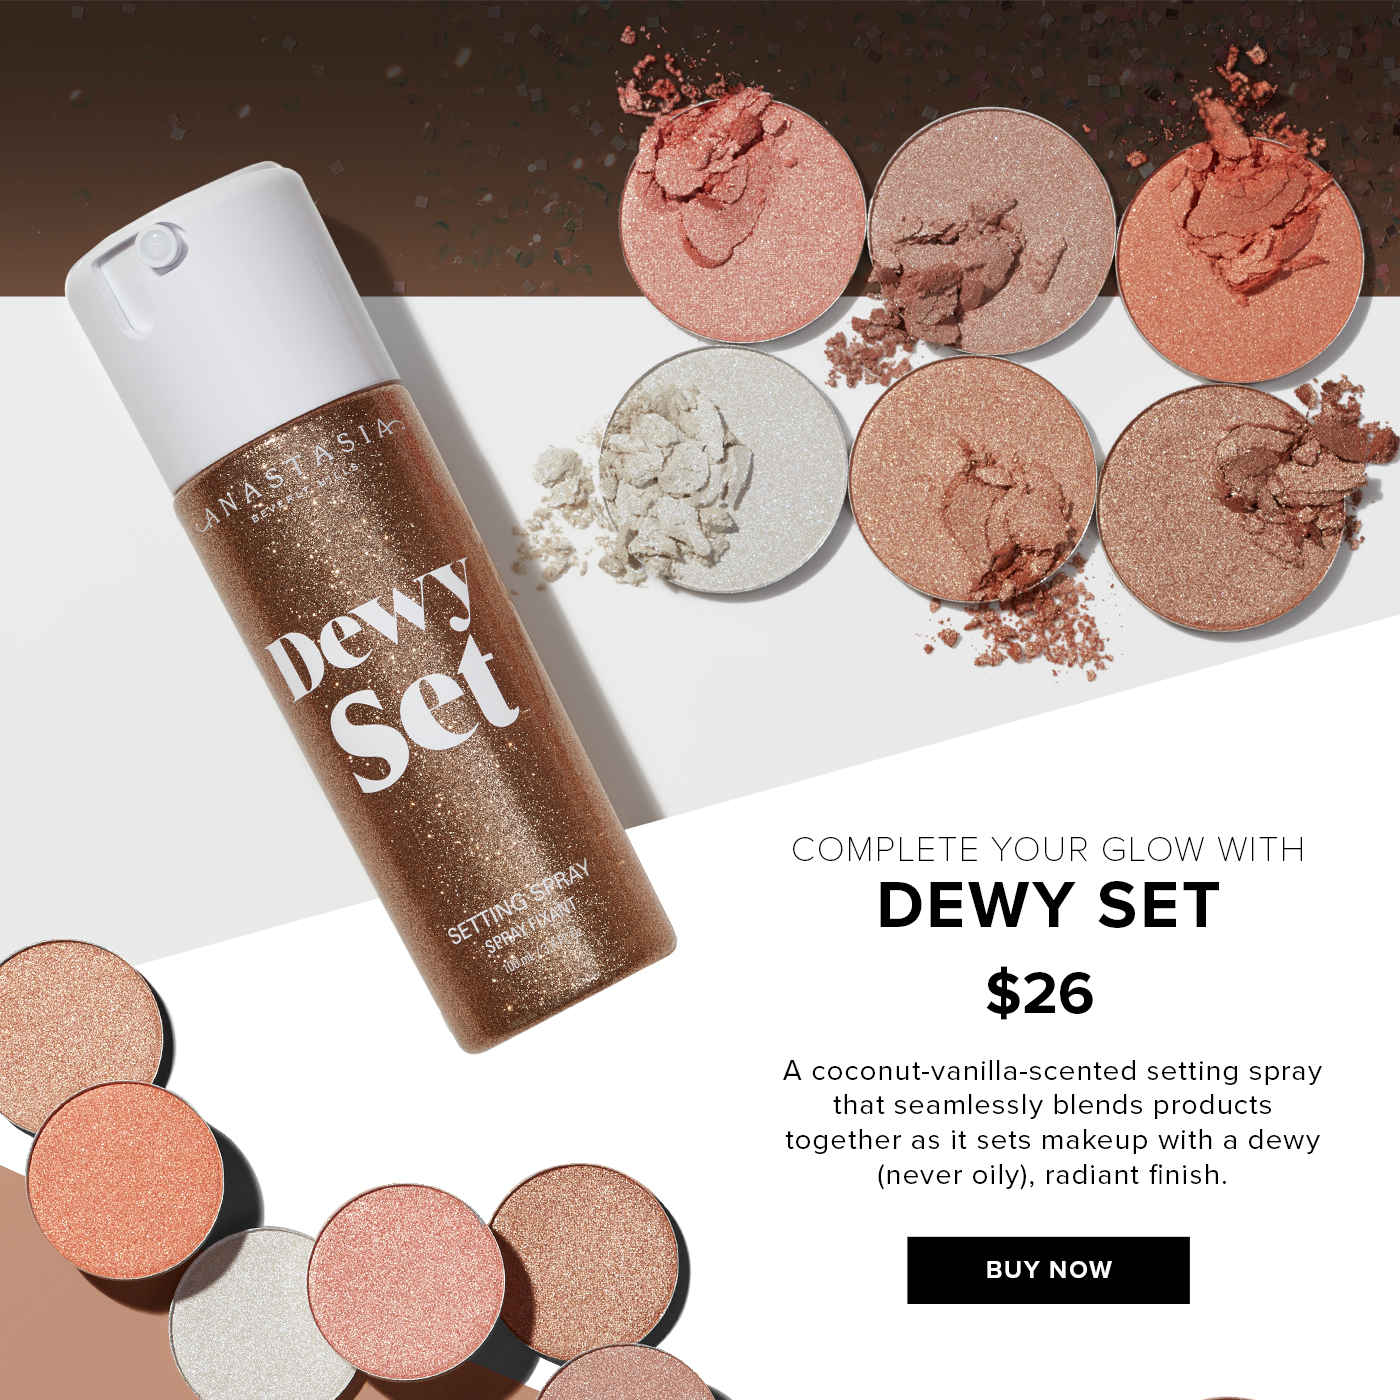 Complete your glow with Dewy Set $26 A cocount-vanilla-scented setting spray that seamlessly blends products together as it sets makeup with a dewy (never oily), radiant finish.